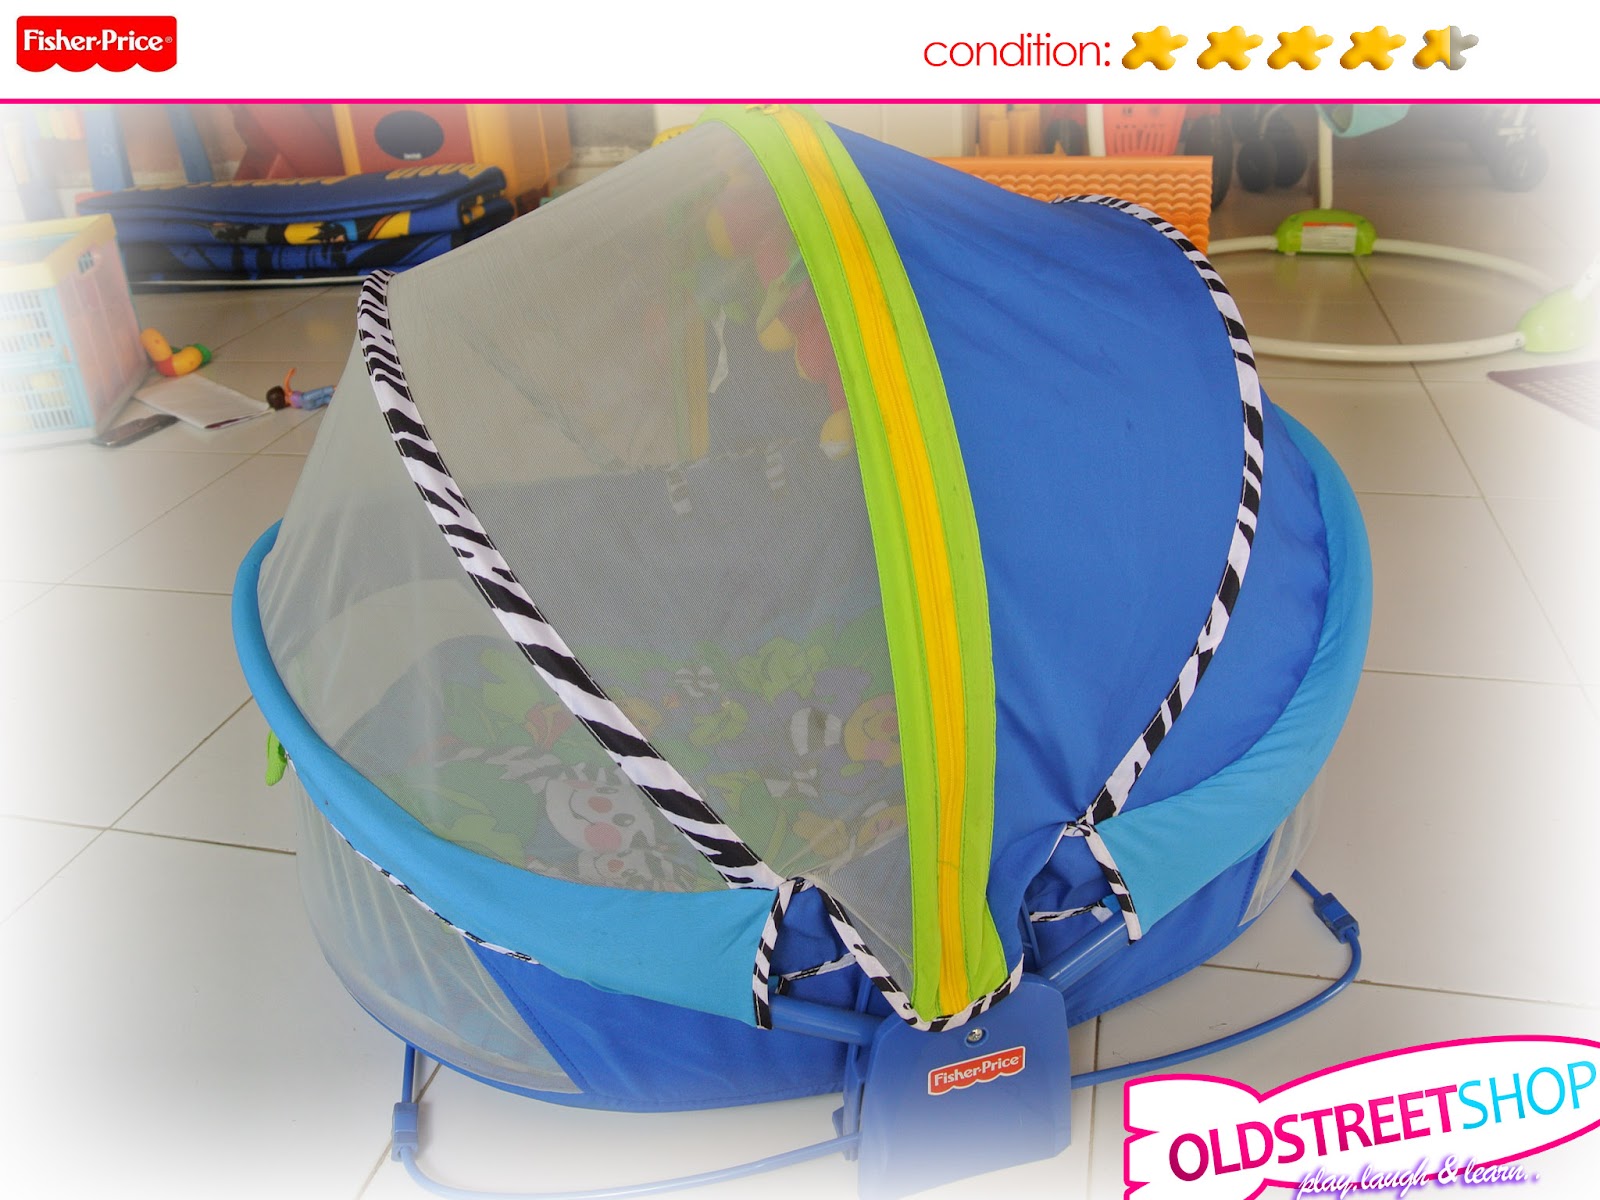 Fisher Price Play Dome